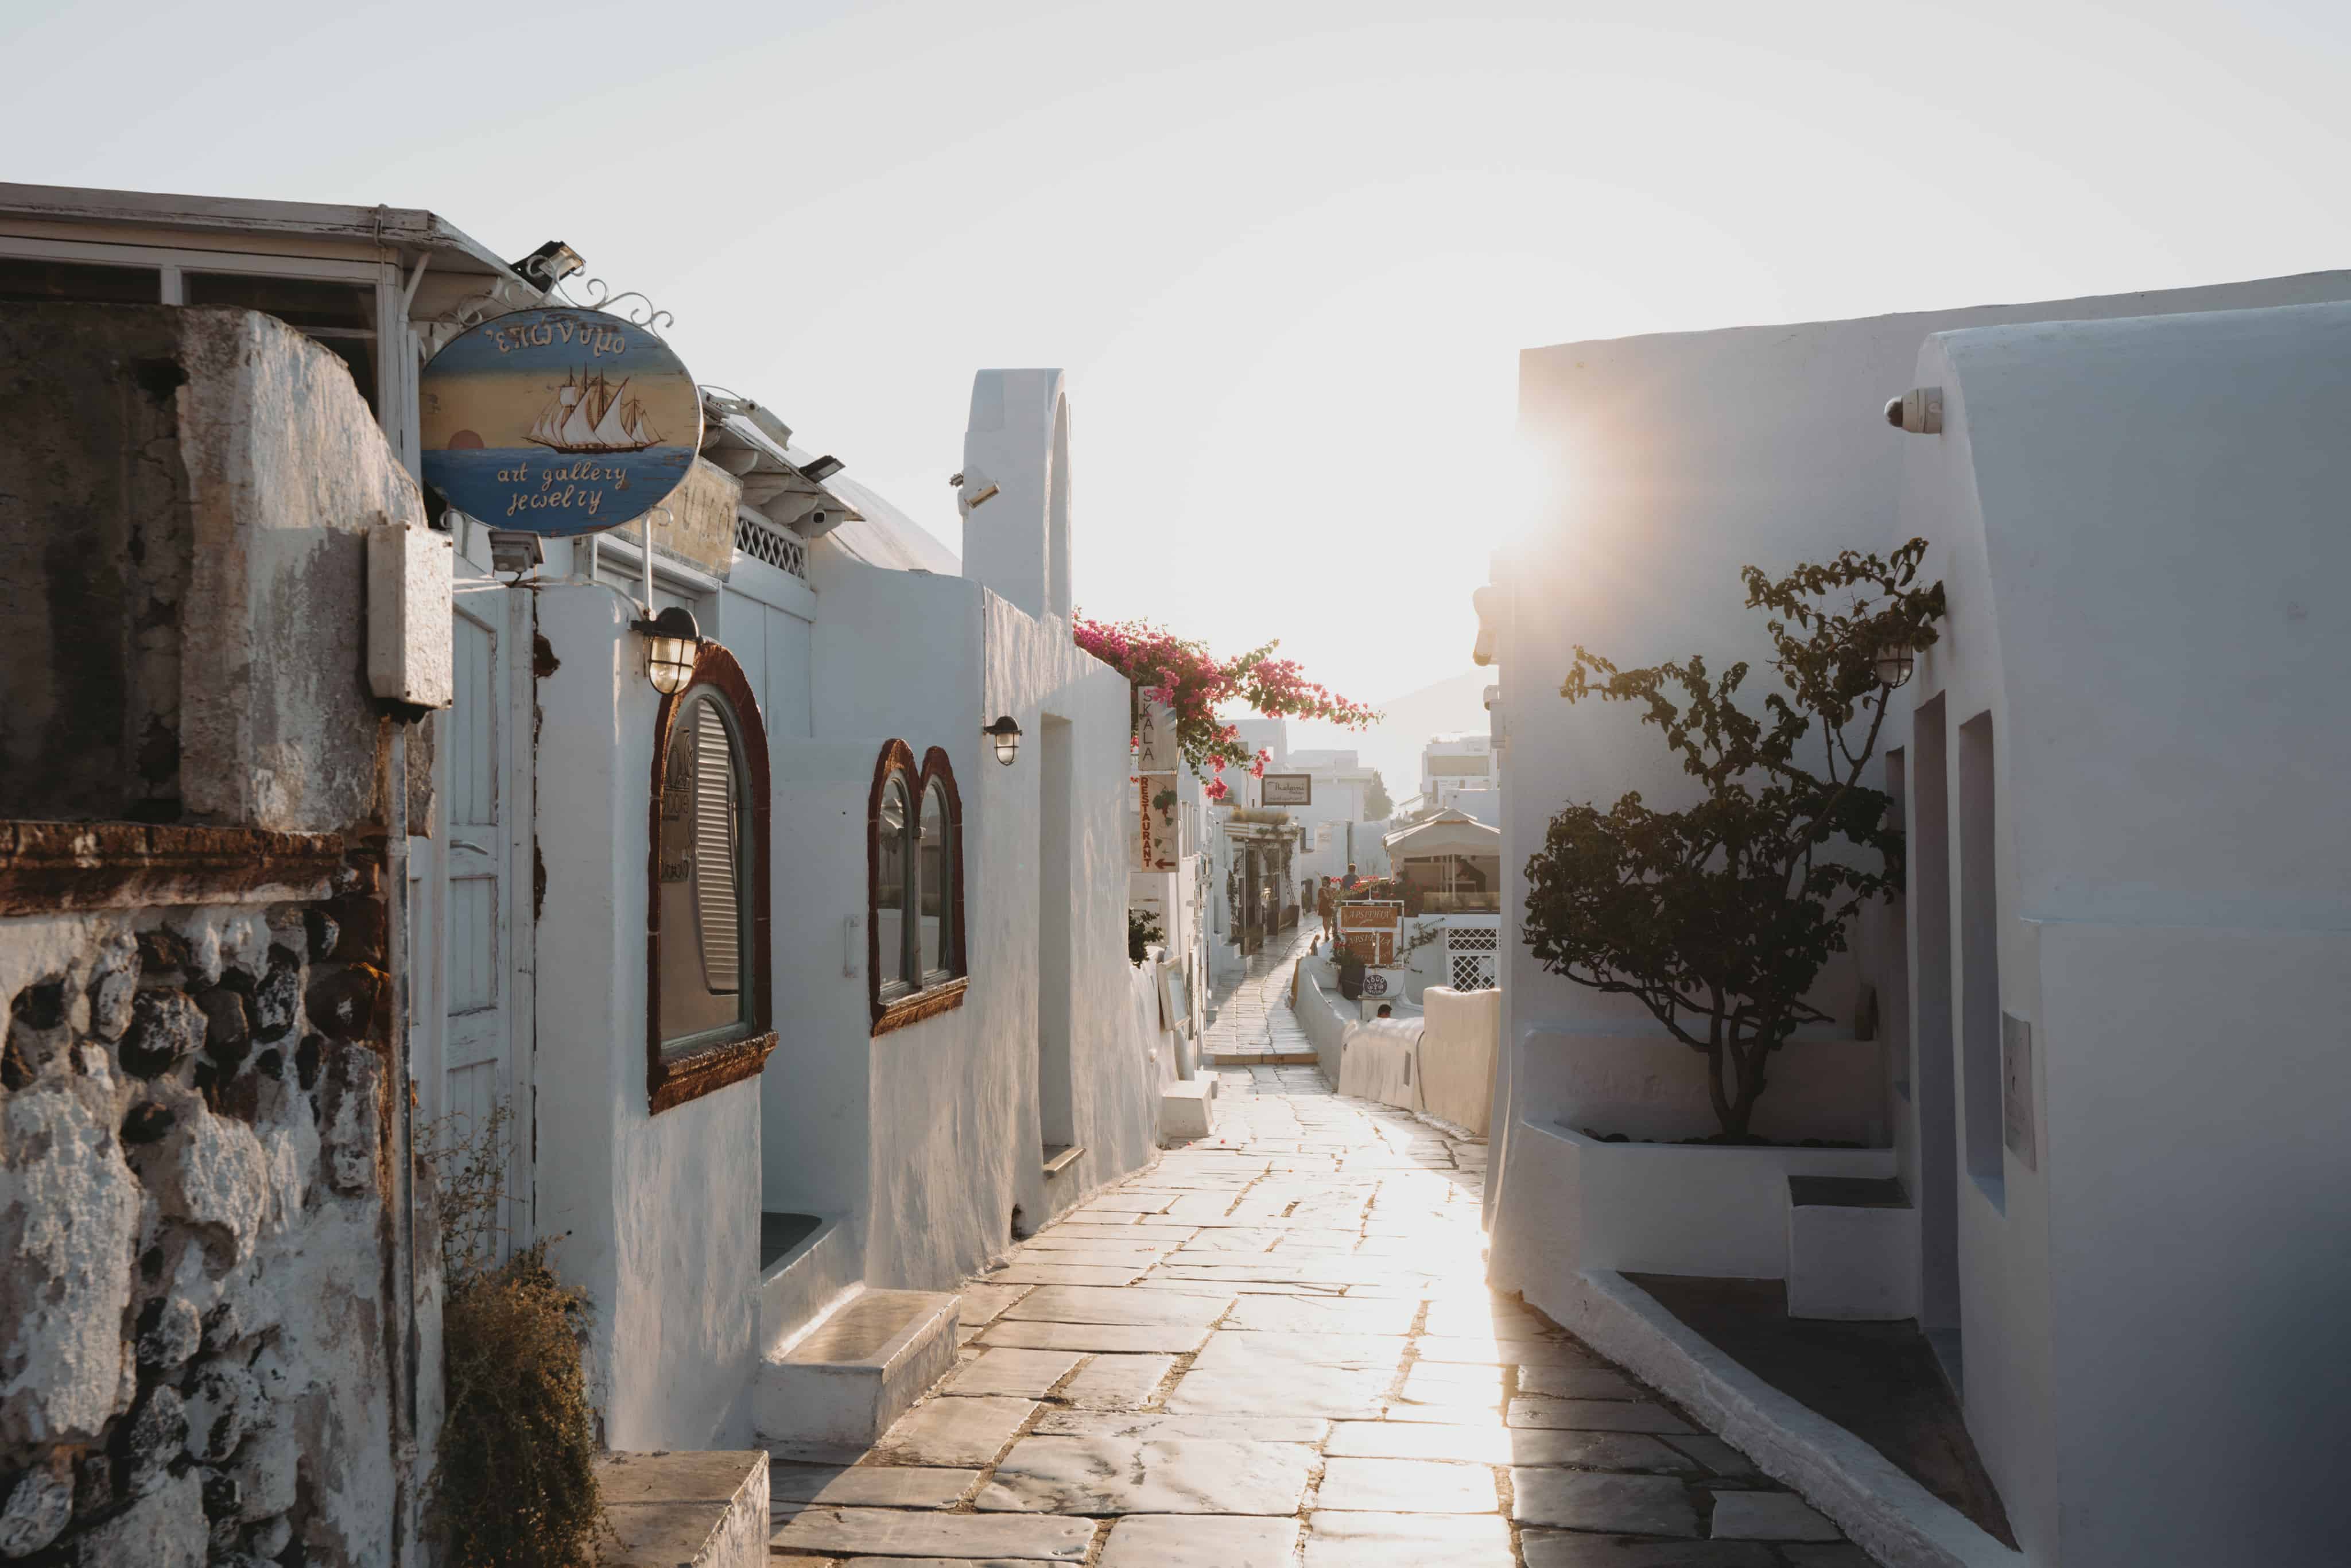 Beat the crowds - The Ultimate off the beaten Santorini travel guide - Sun Chasing Travelers